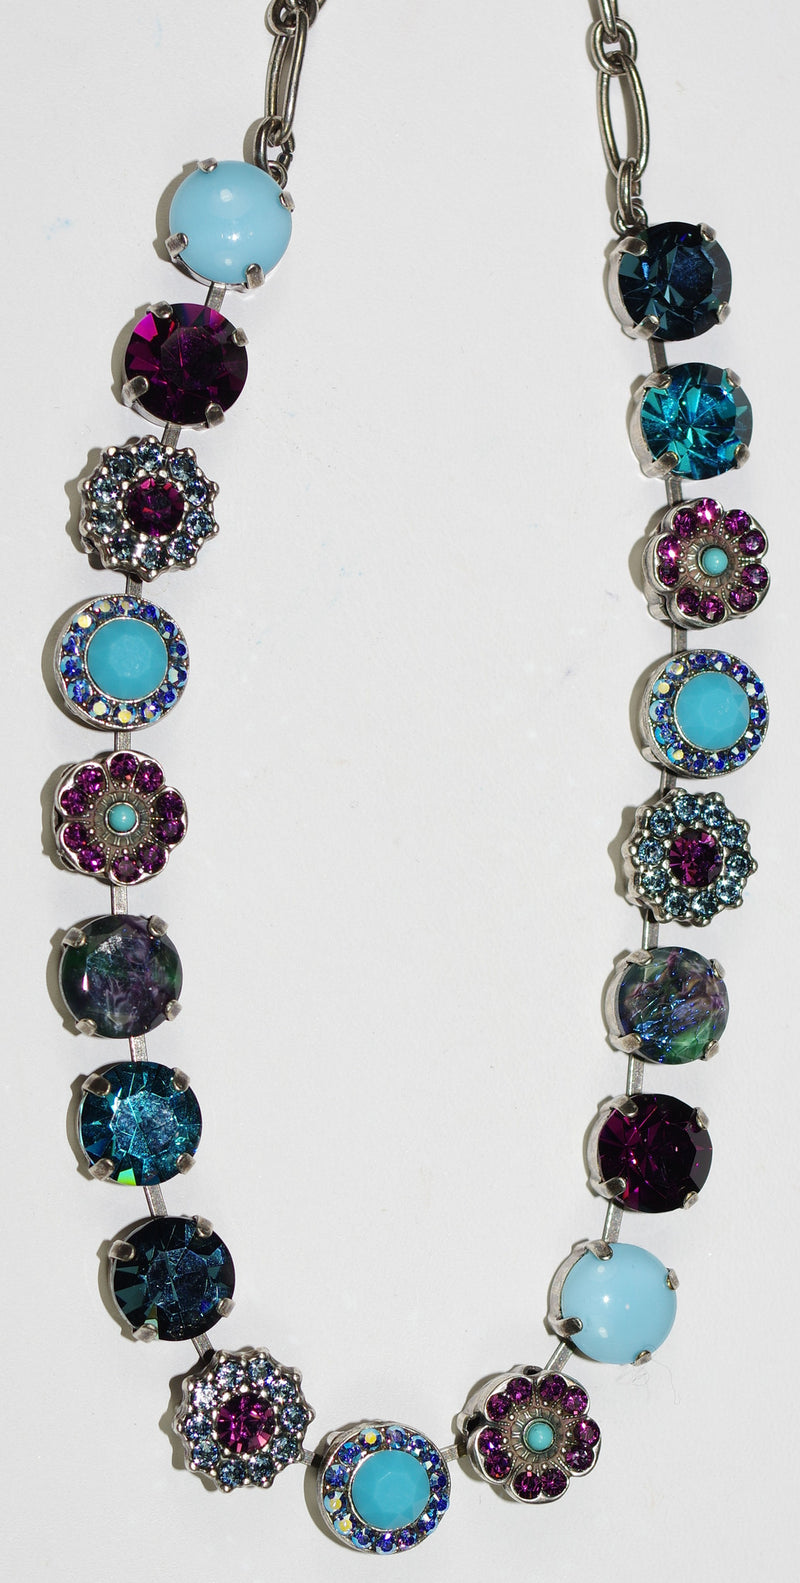 MARIANA NECKLACE INSPIRE SOPHIA: blue, a/b, purple stones in silver setting, 17" adjustable chain